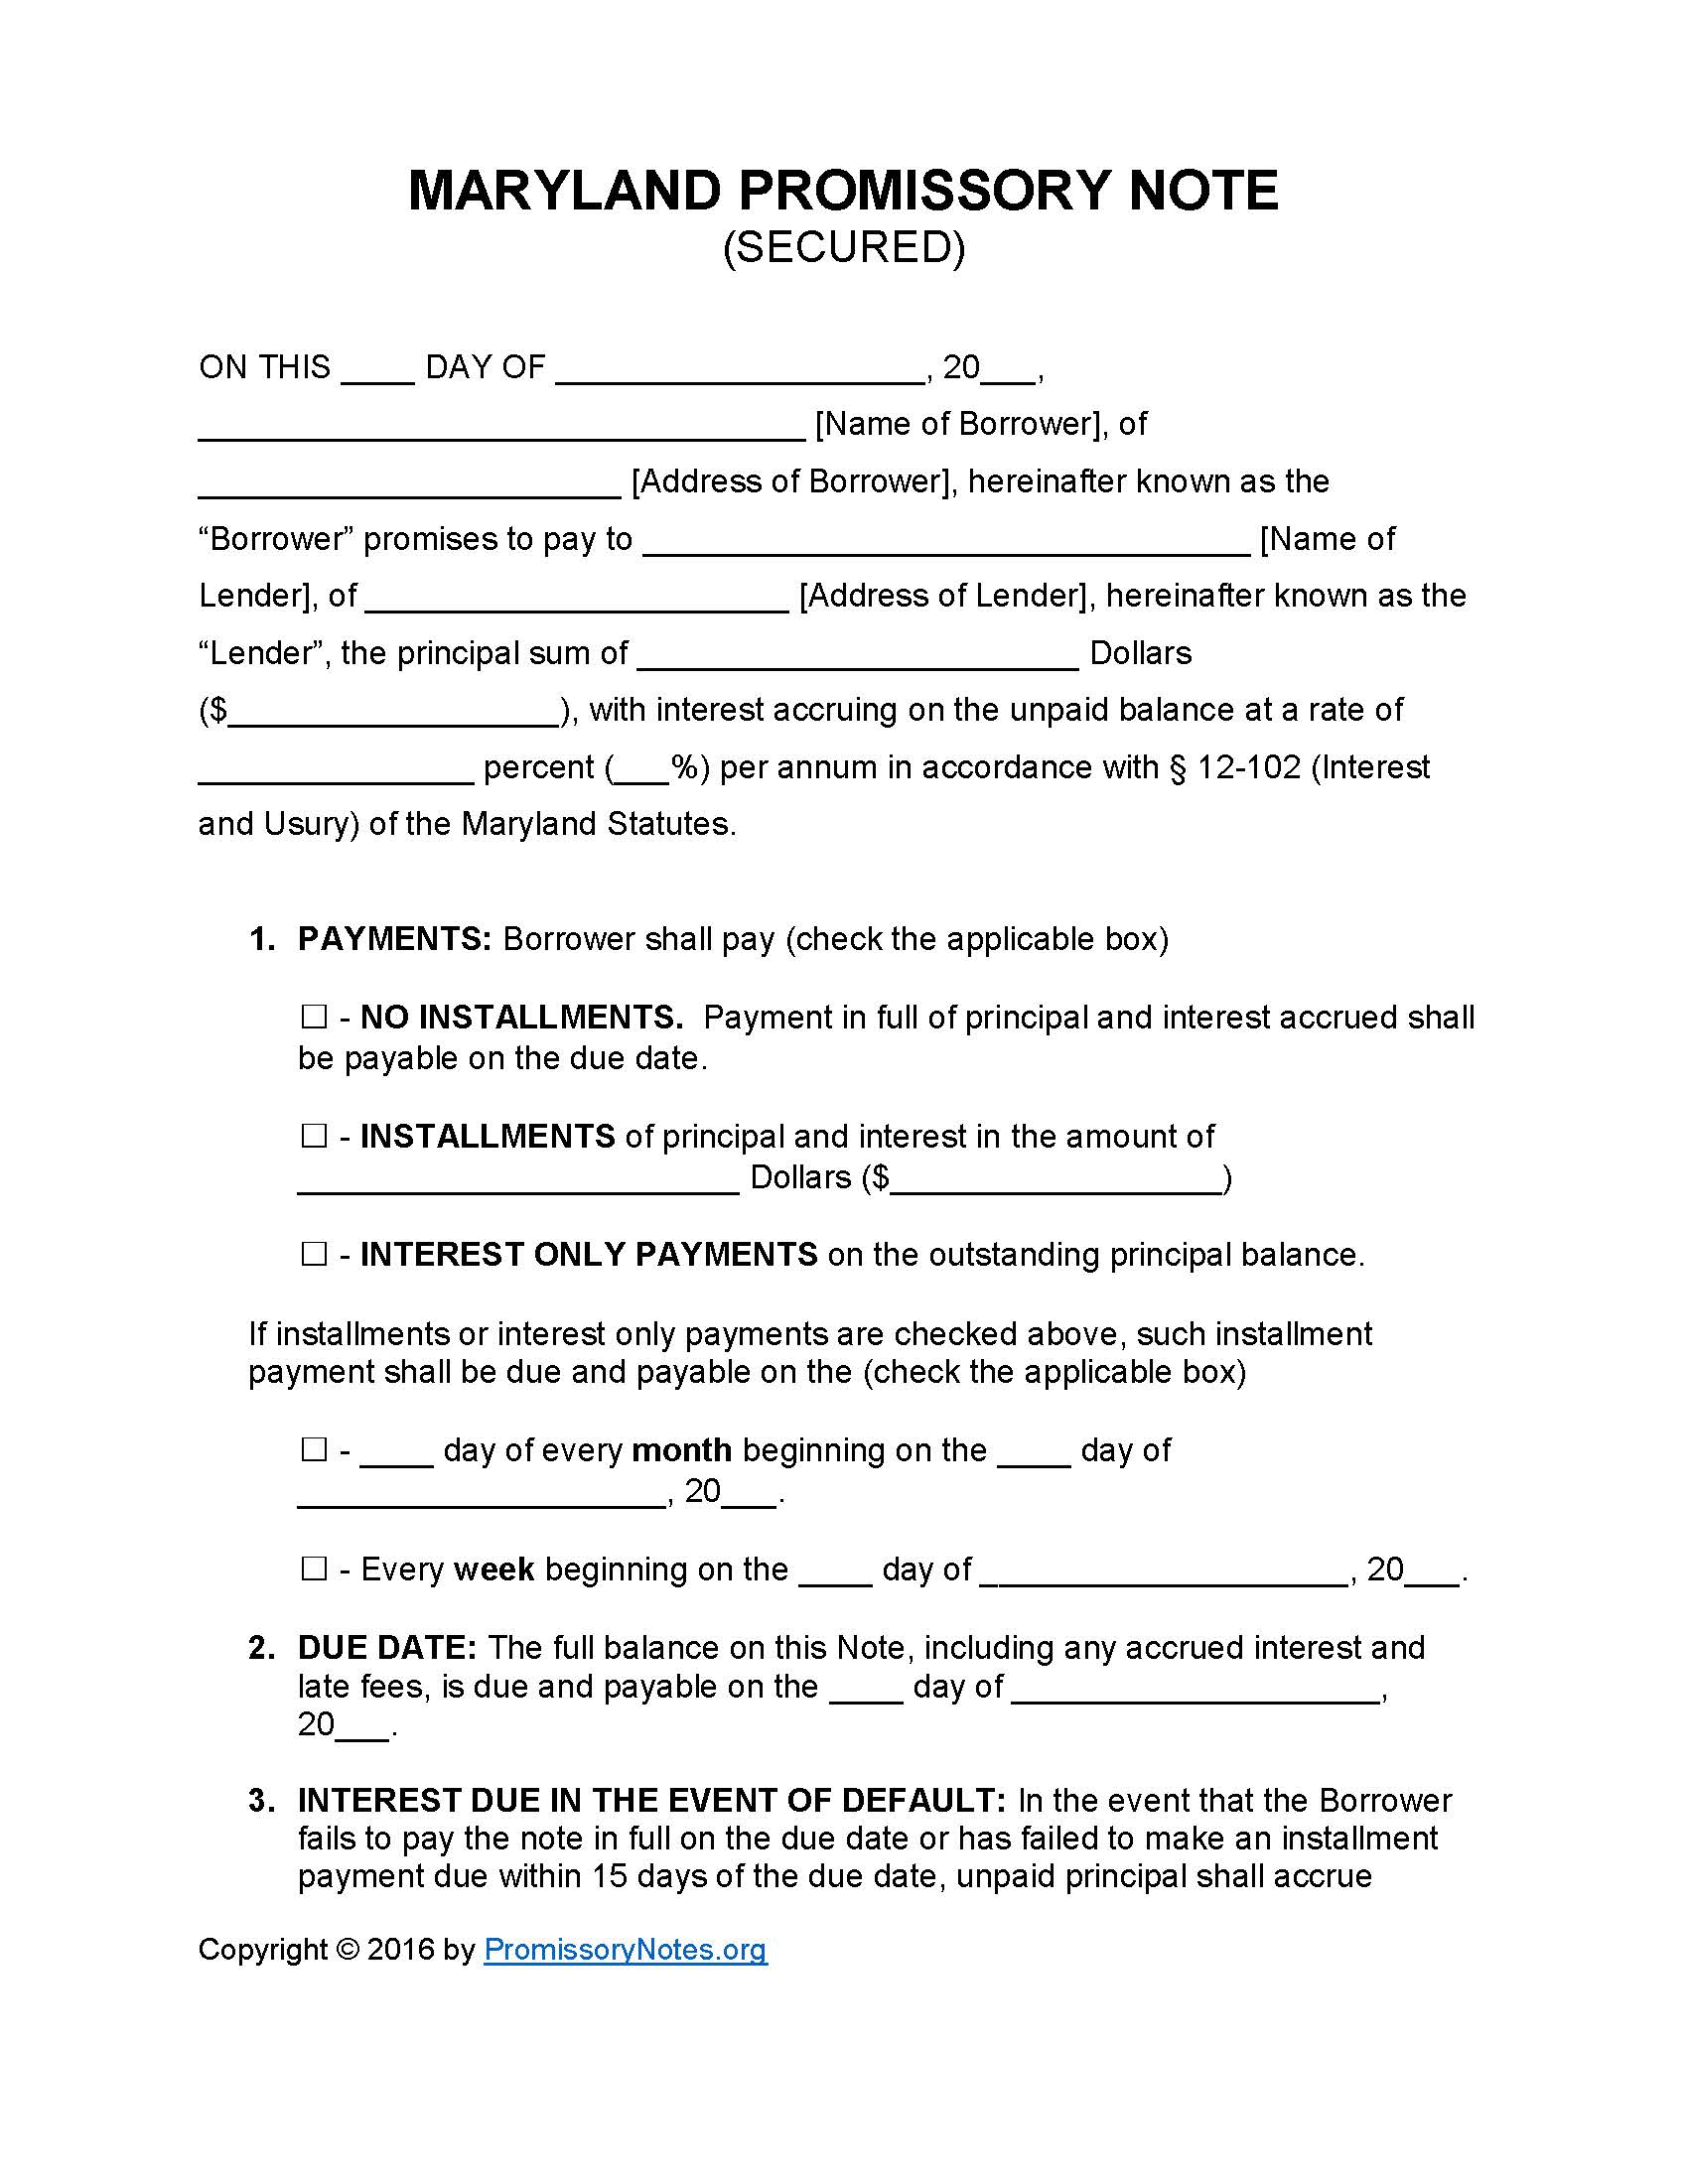 maryland-secured-promissory-note-form